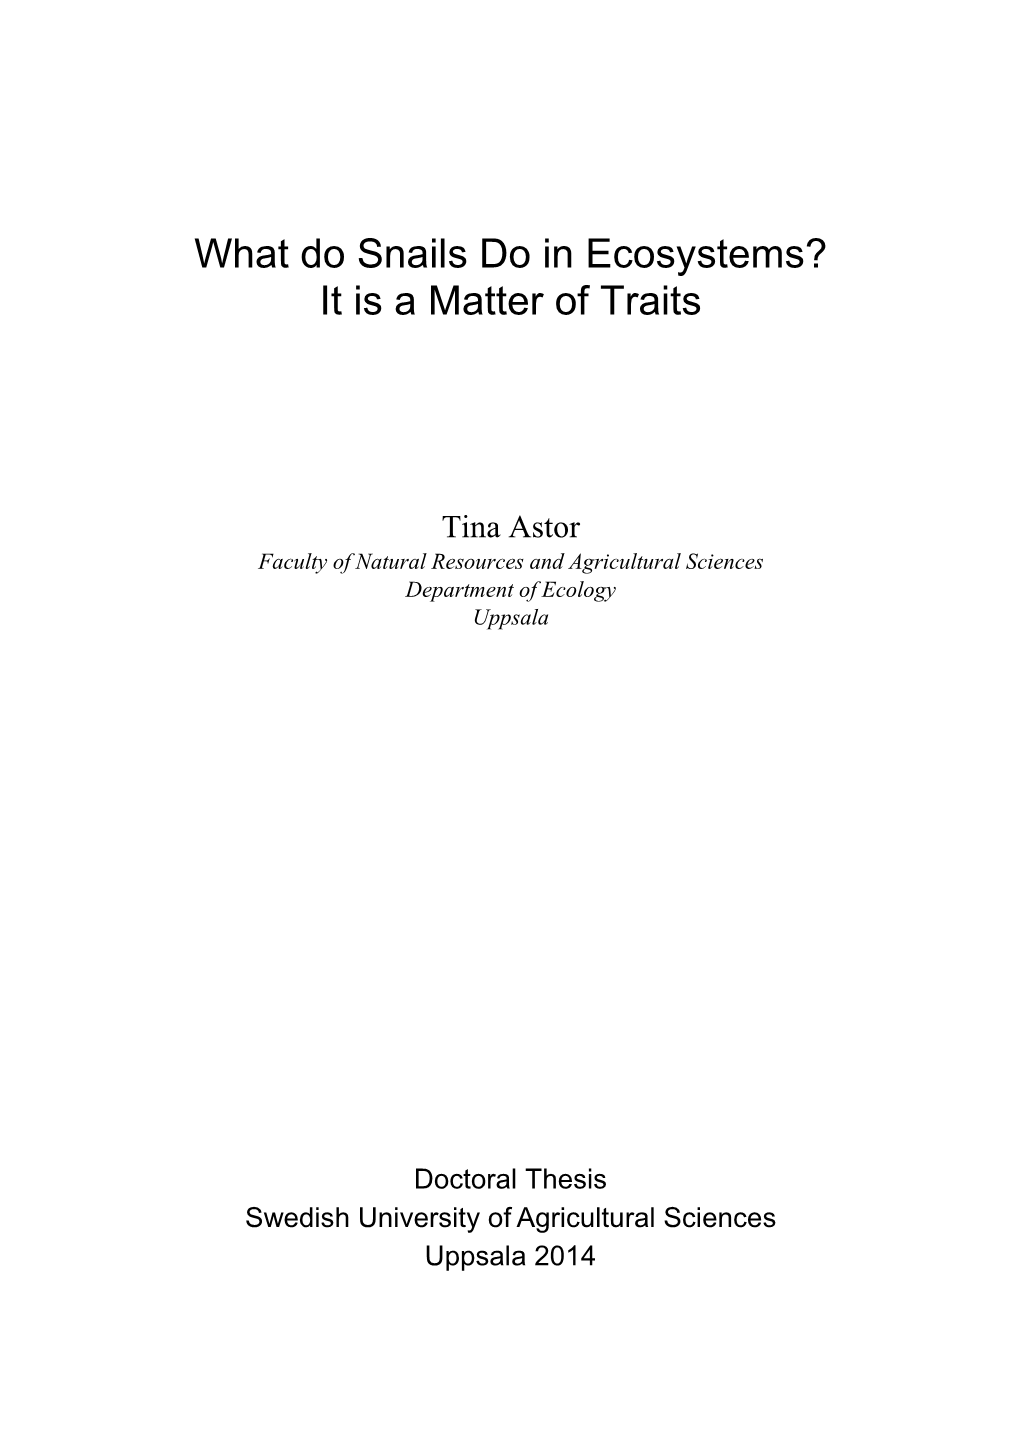 What Do Snails Do in Ecosystems? It Is a Matter of Traits